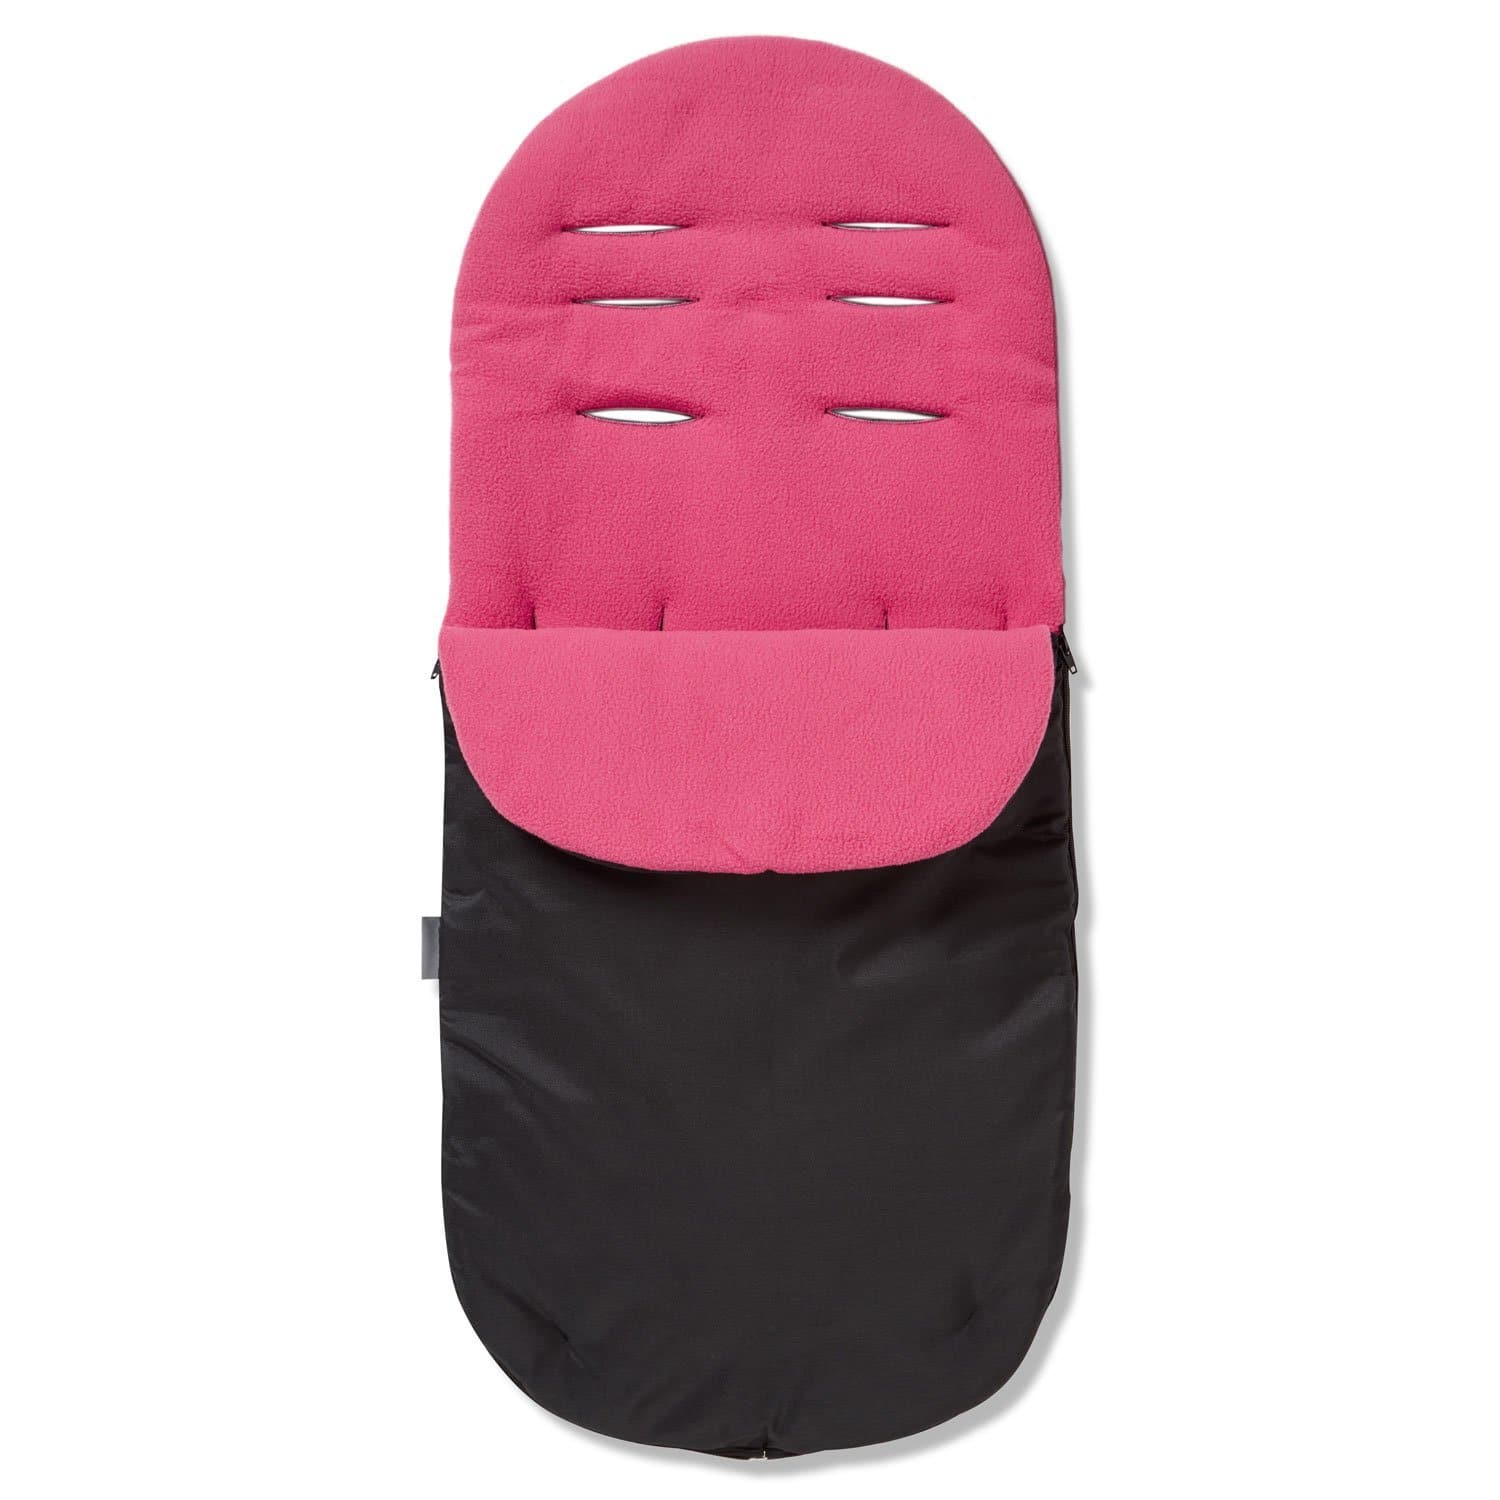 Footmuff / Cosy Toes Compatible with Stokke - Dark Pink / Fits All Models | For Your Little One